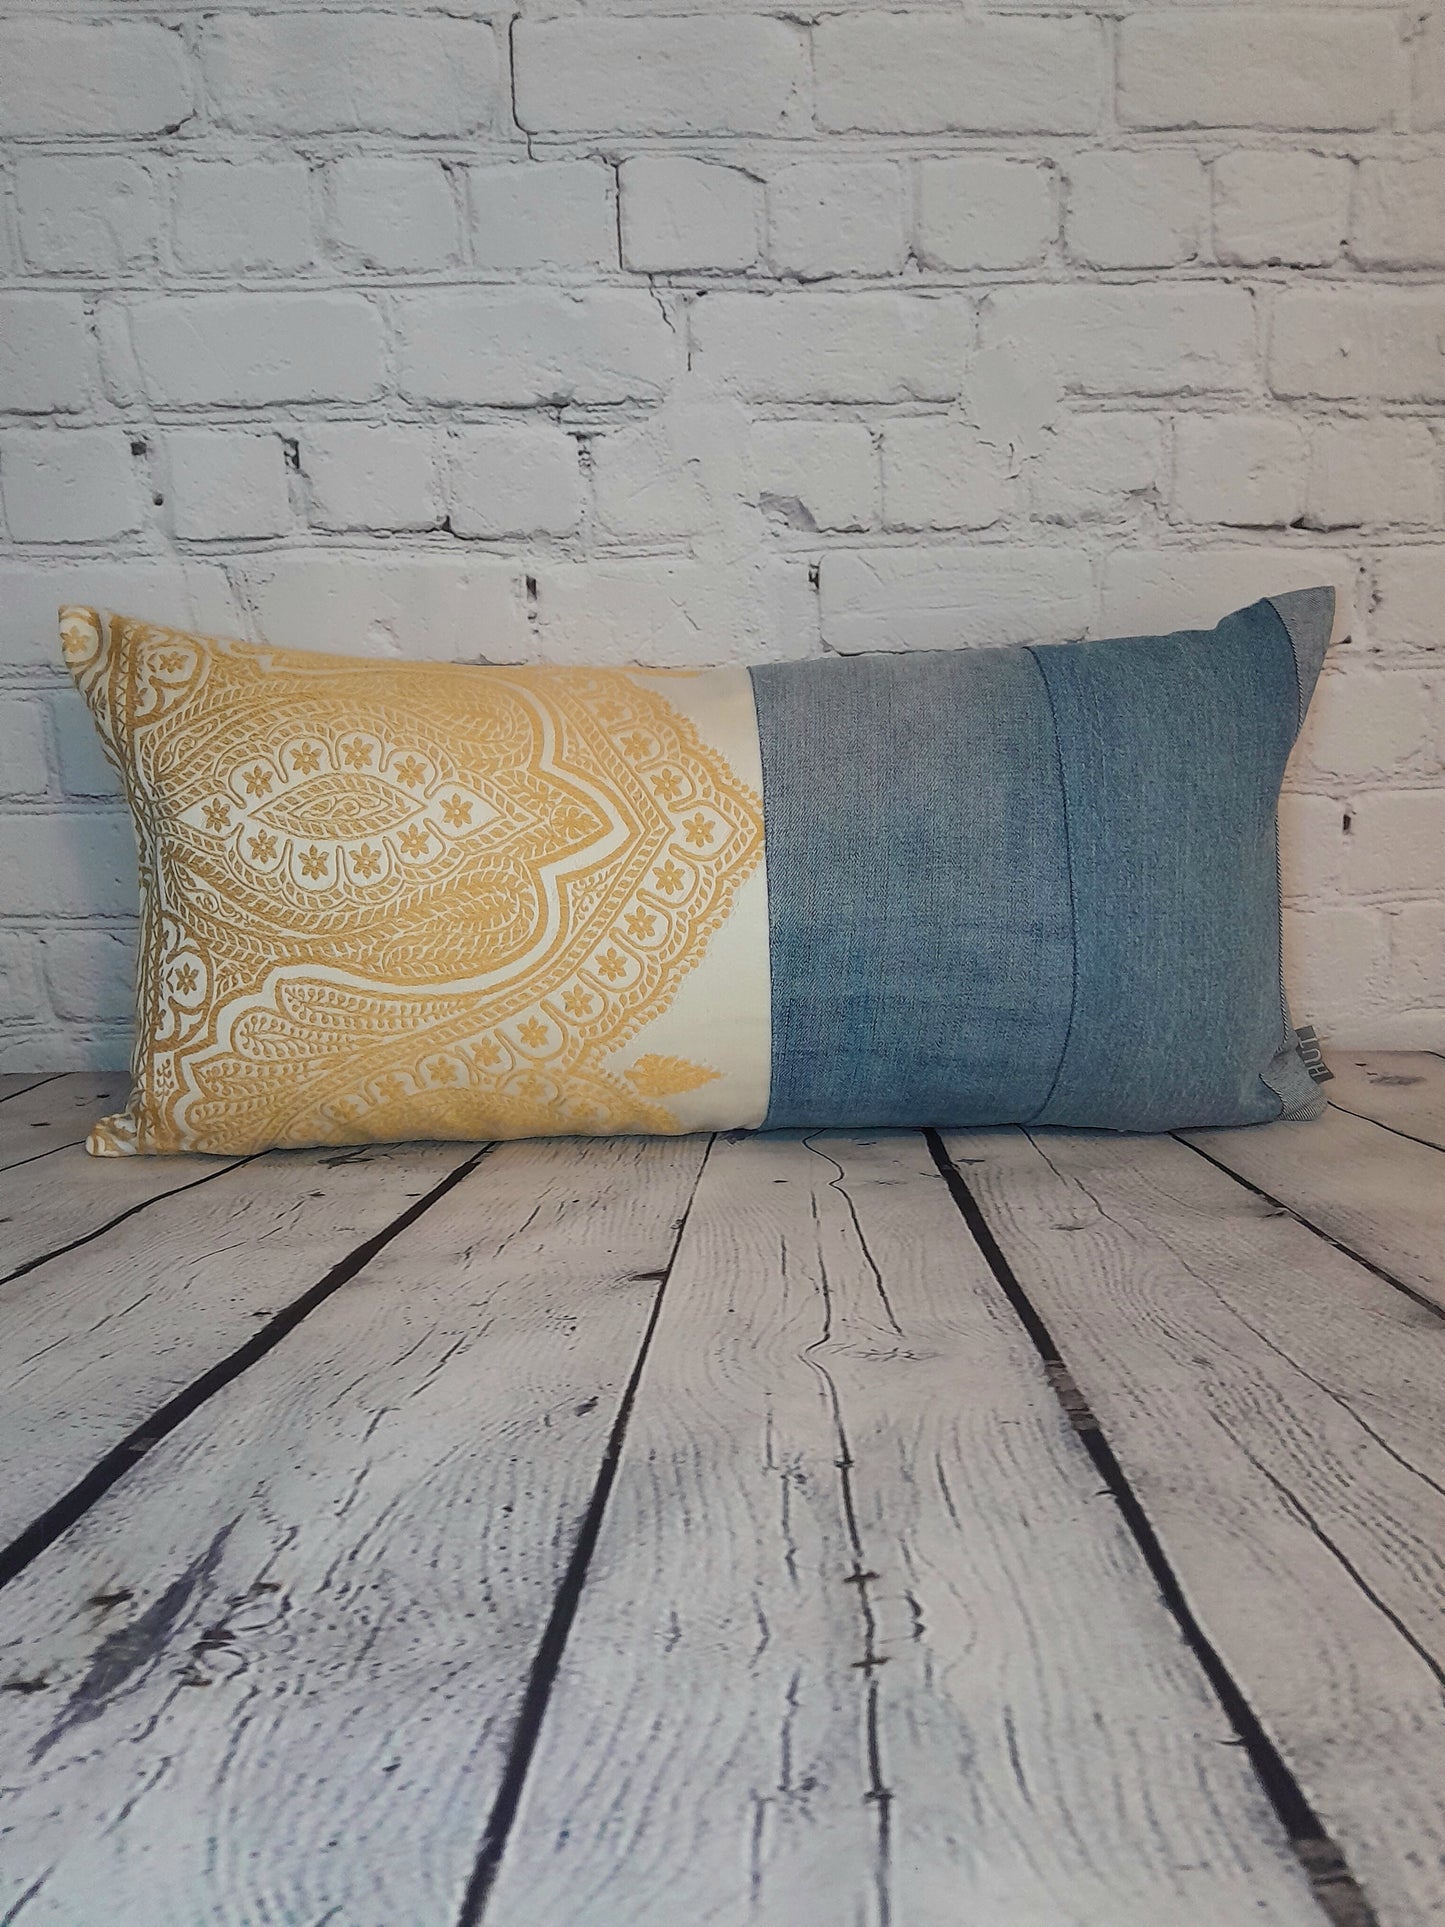 Yellow and cream embroidered cushion with repurposed pale blue denim.  Upcycled luxe homeware.